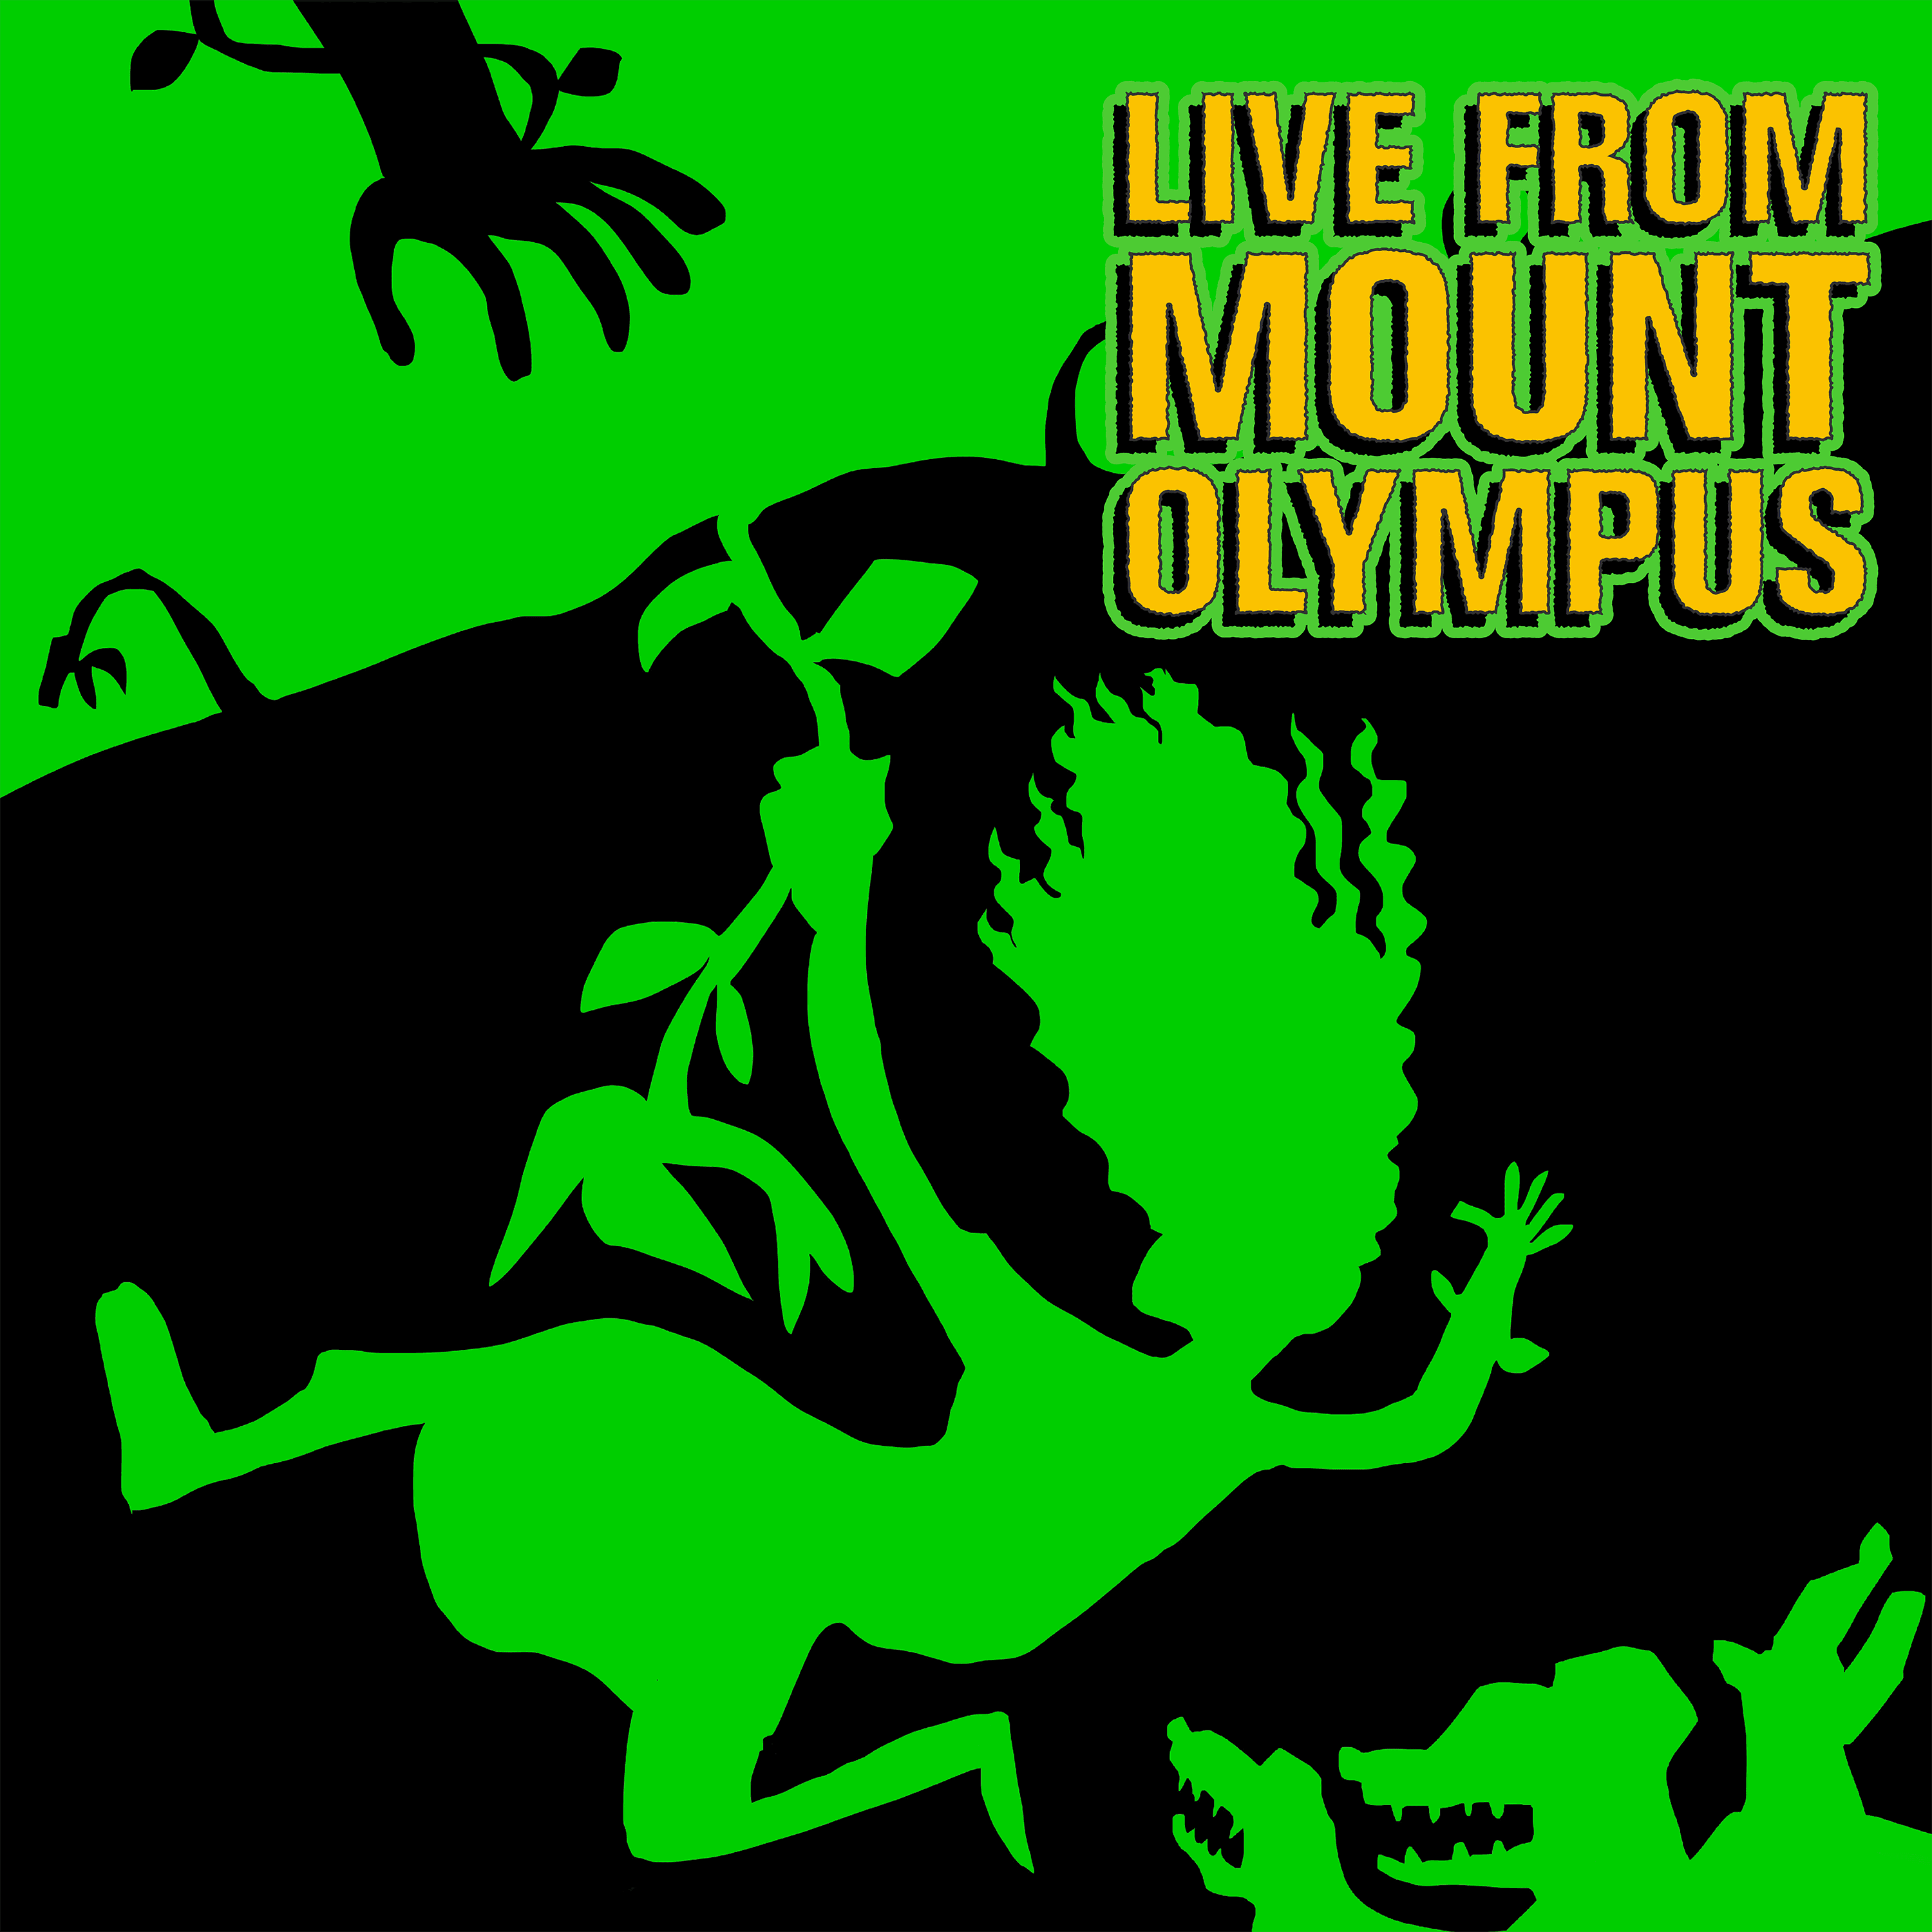 Thumbnail for "Live From Mount Olympus: Persephone: Trailer".